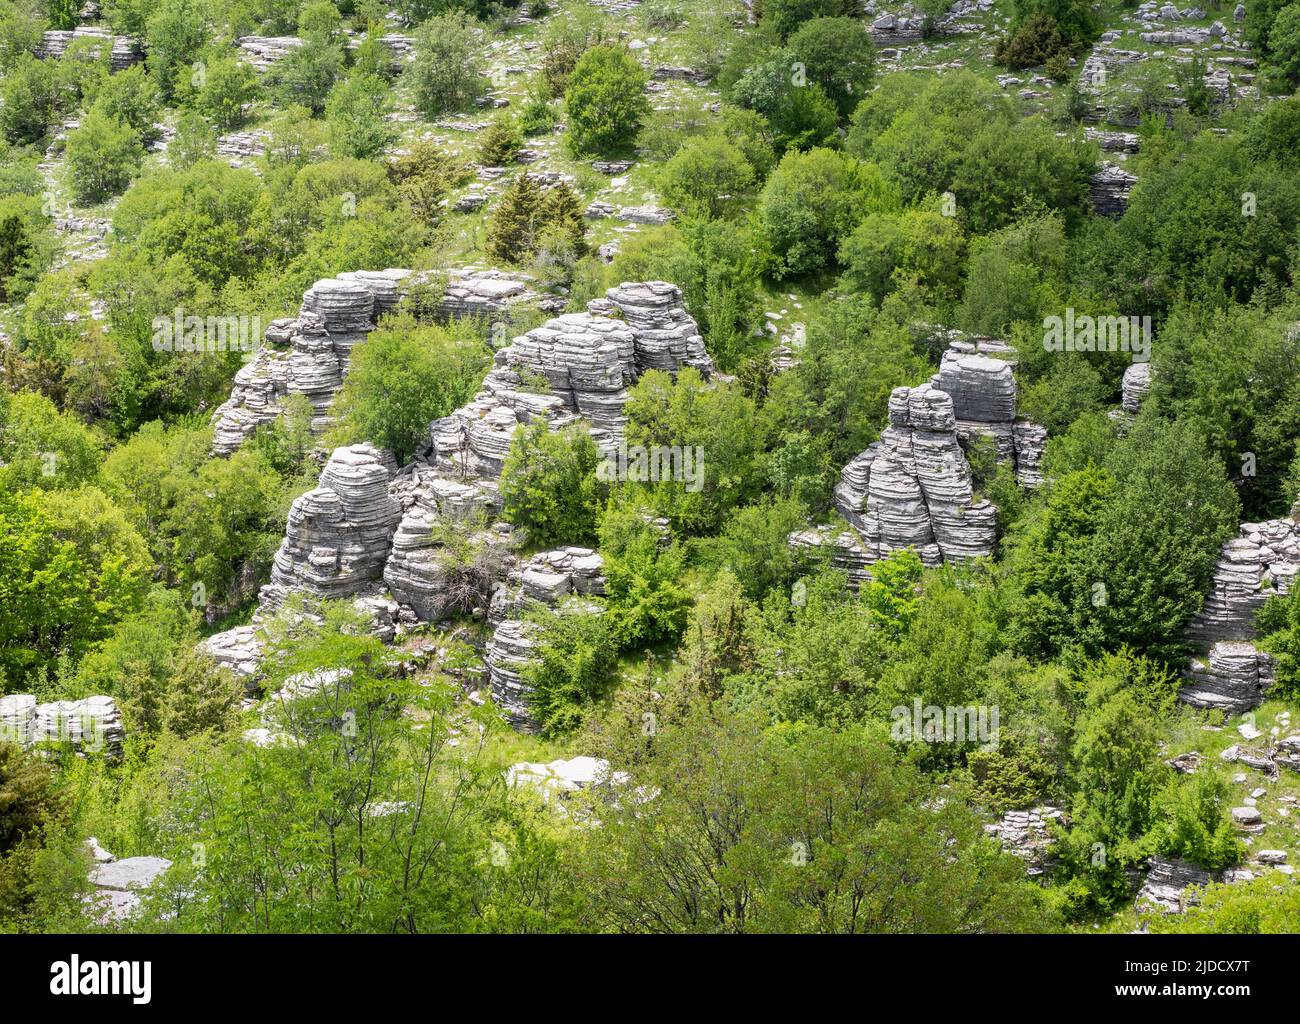 Rock pinnacles formed by weathering of Karst limestone in the Vikos Gorge in the Zagori region of northern Greece Stock Photo